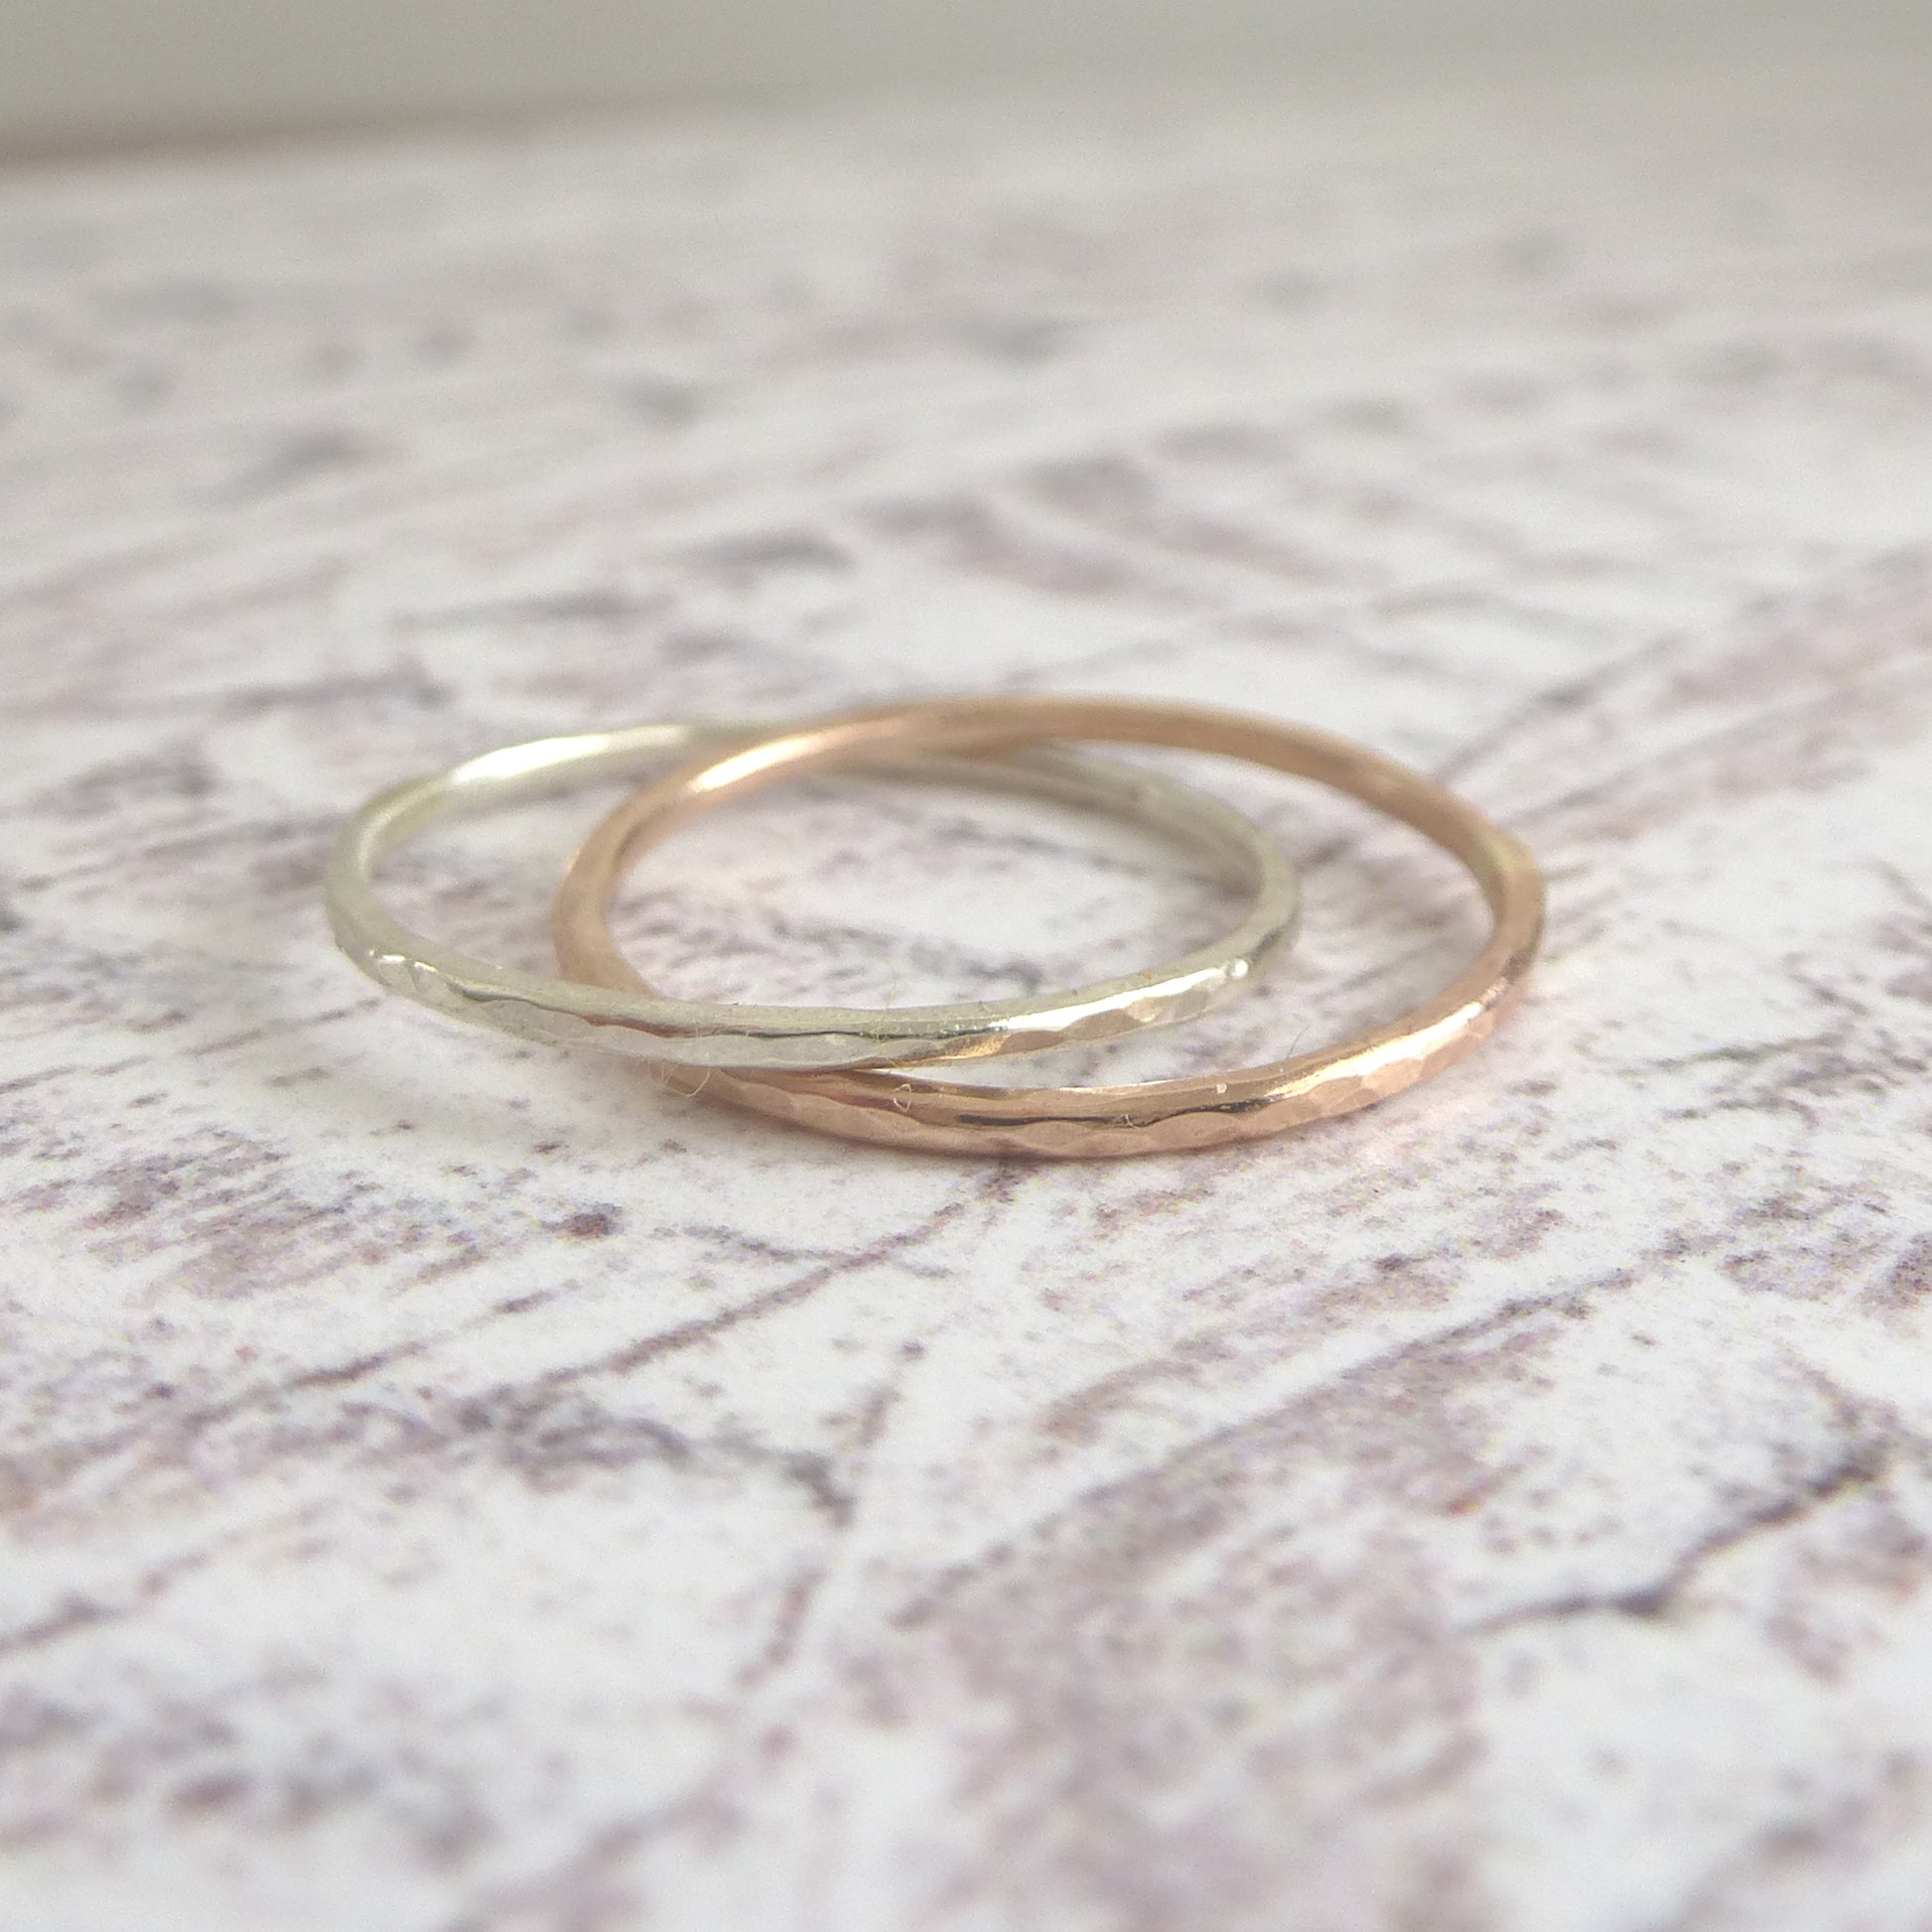 A pair of joined or russian wedding ring style bands in 9ct white and rose gold, with a hammered finish, close up